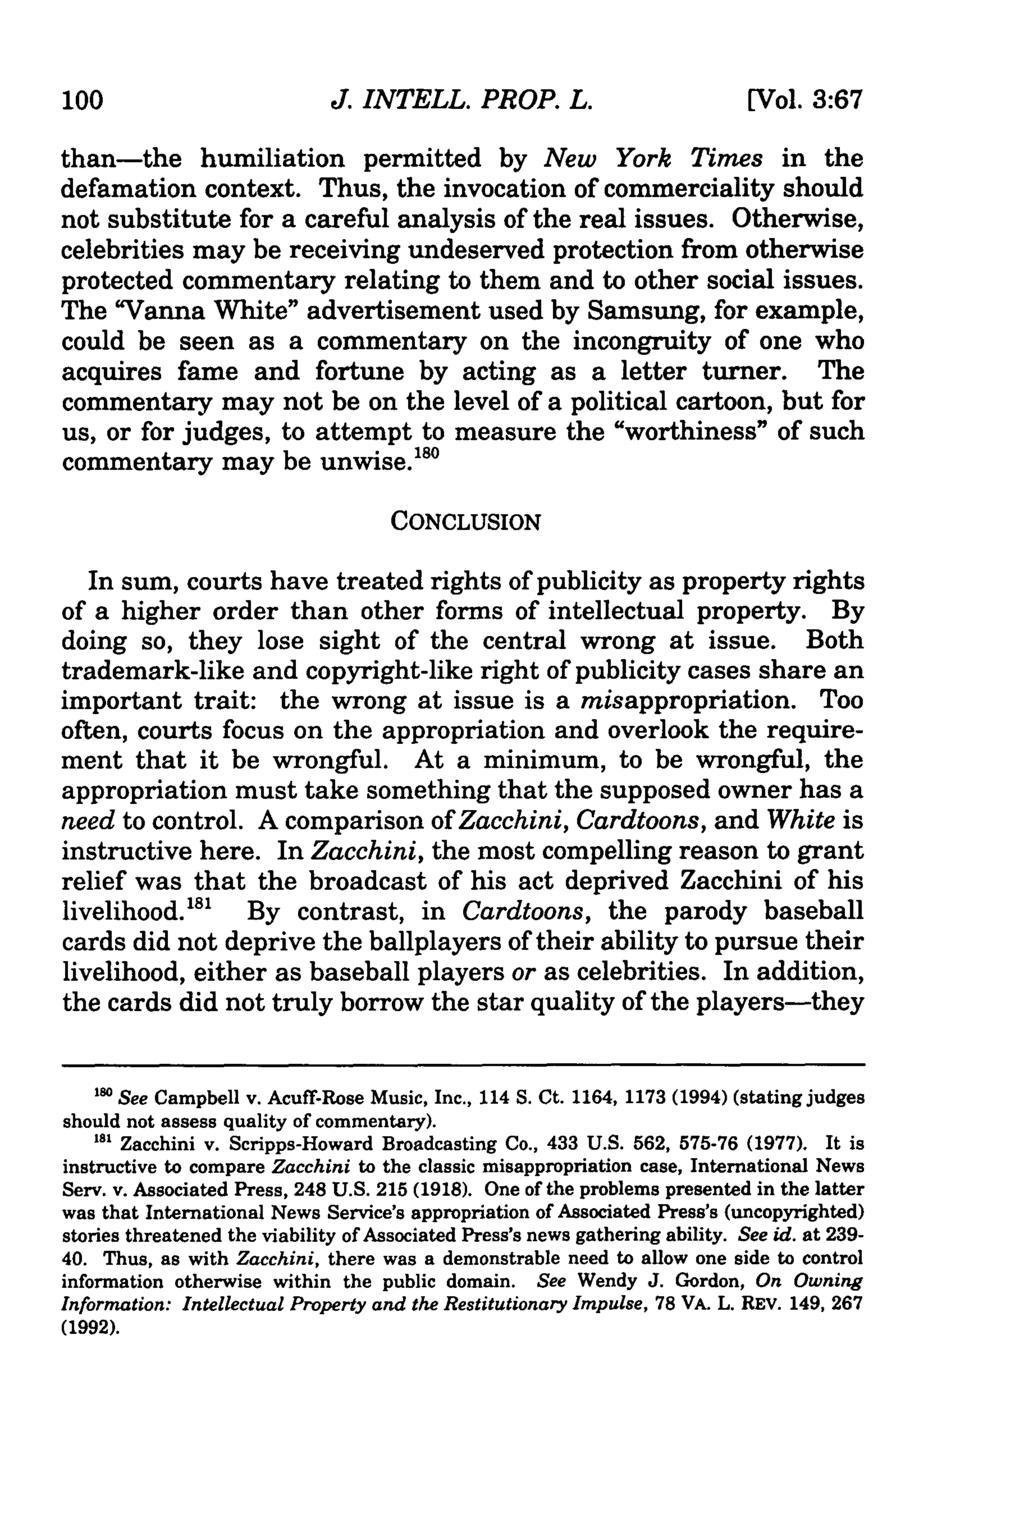 Journal of Intellectual Property Law, Vol. 3, Iss. 1 [1995], Art. 3 J. INTELL. PROP. L. than-the humiliation permitted by New York Times in the defamation context.